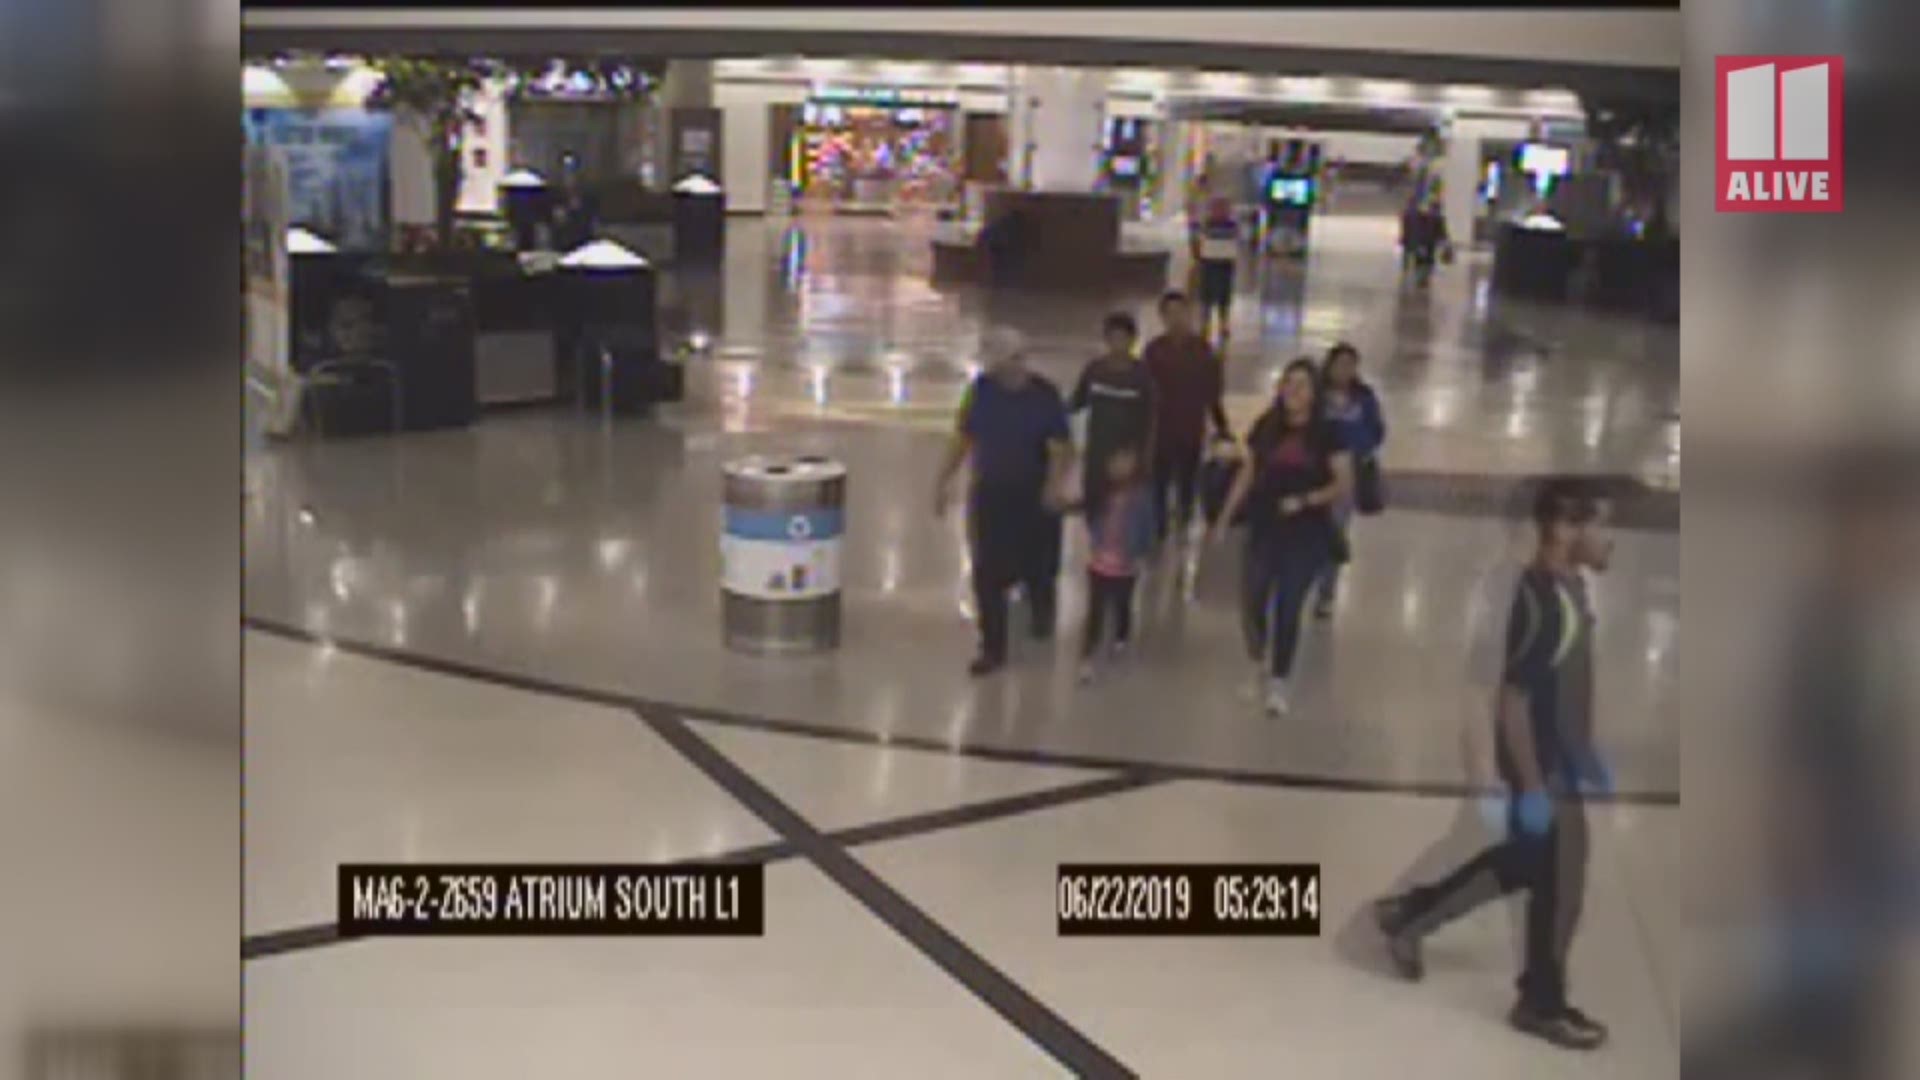 A bizarre incident at the Hartsfield-Jackson Atlanta International Airport over the weekend landed one woman in handcuffs for allegedly attempting to abduct children.